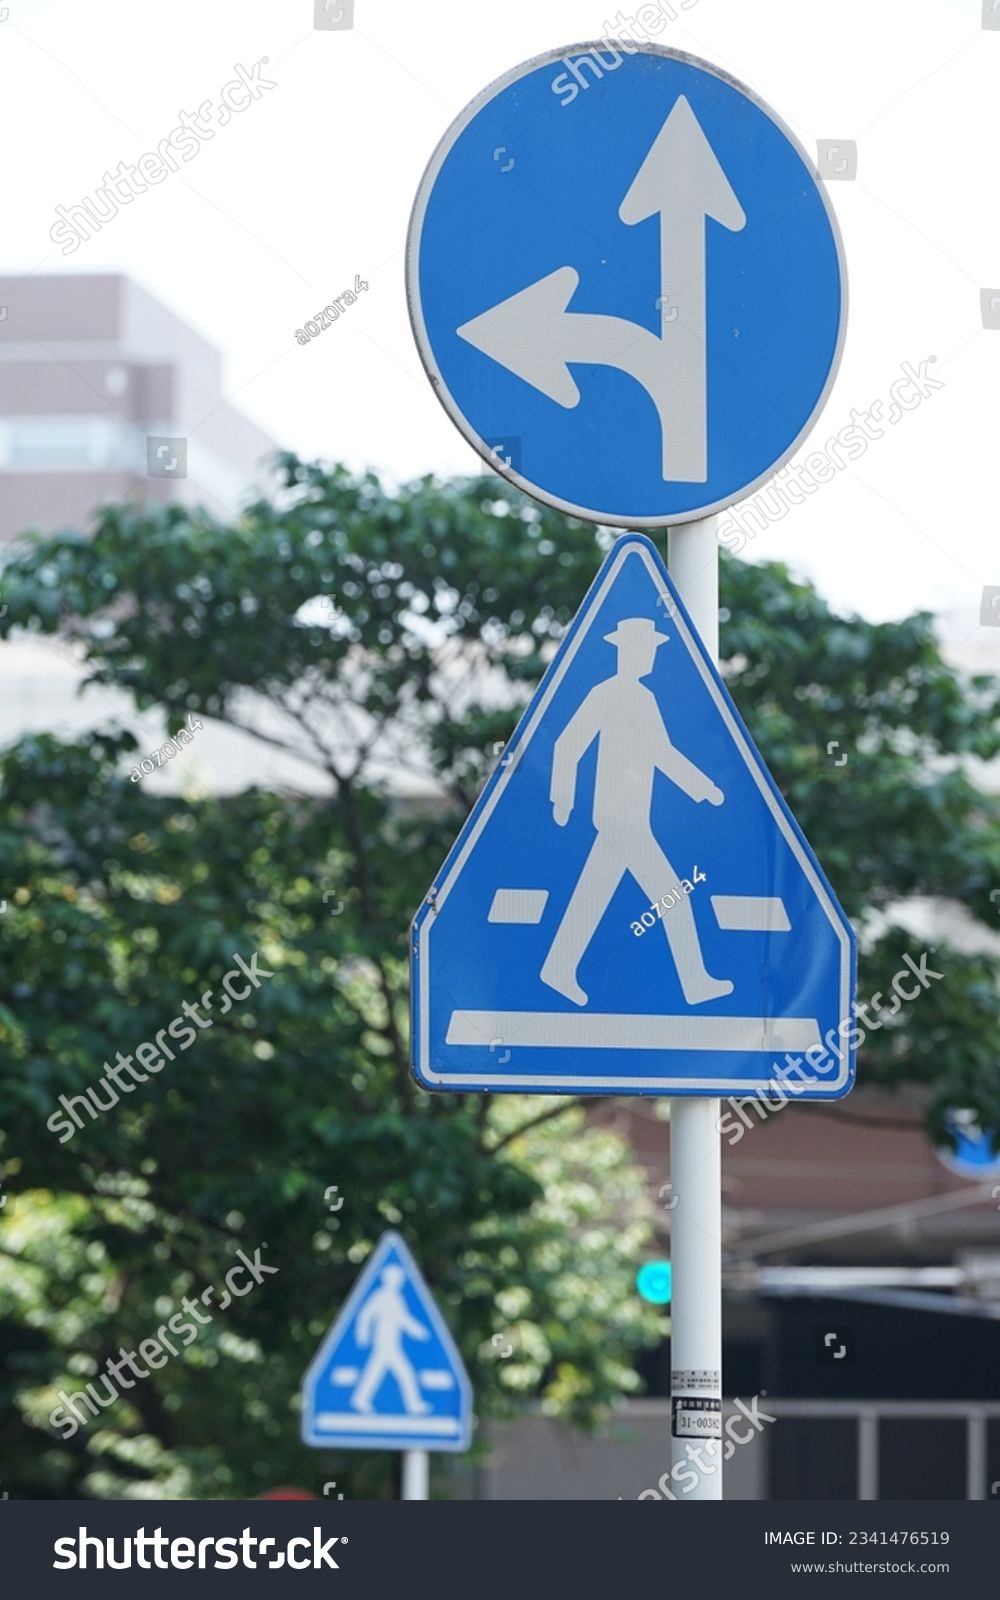 Blue traffic sign on Japan road showing direction signs and pedestrian crossings                                #2341476519